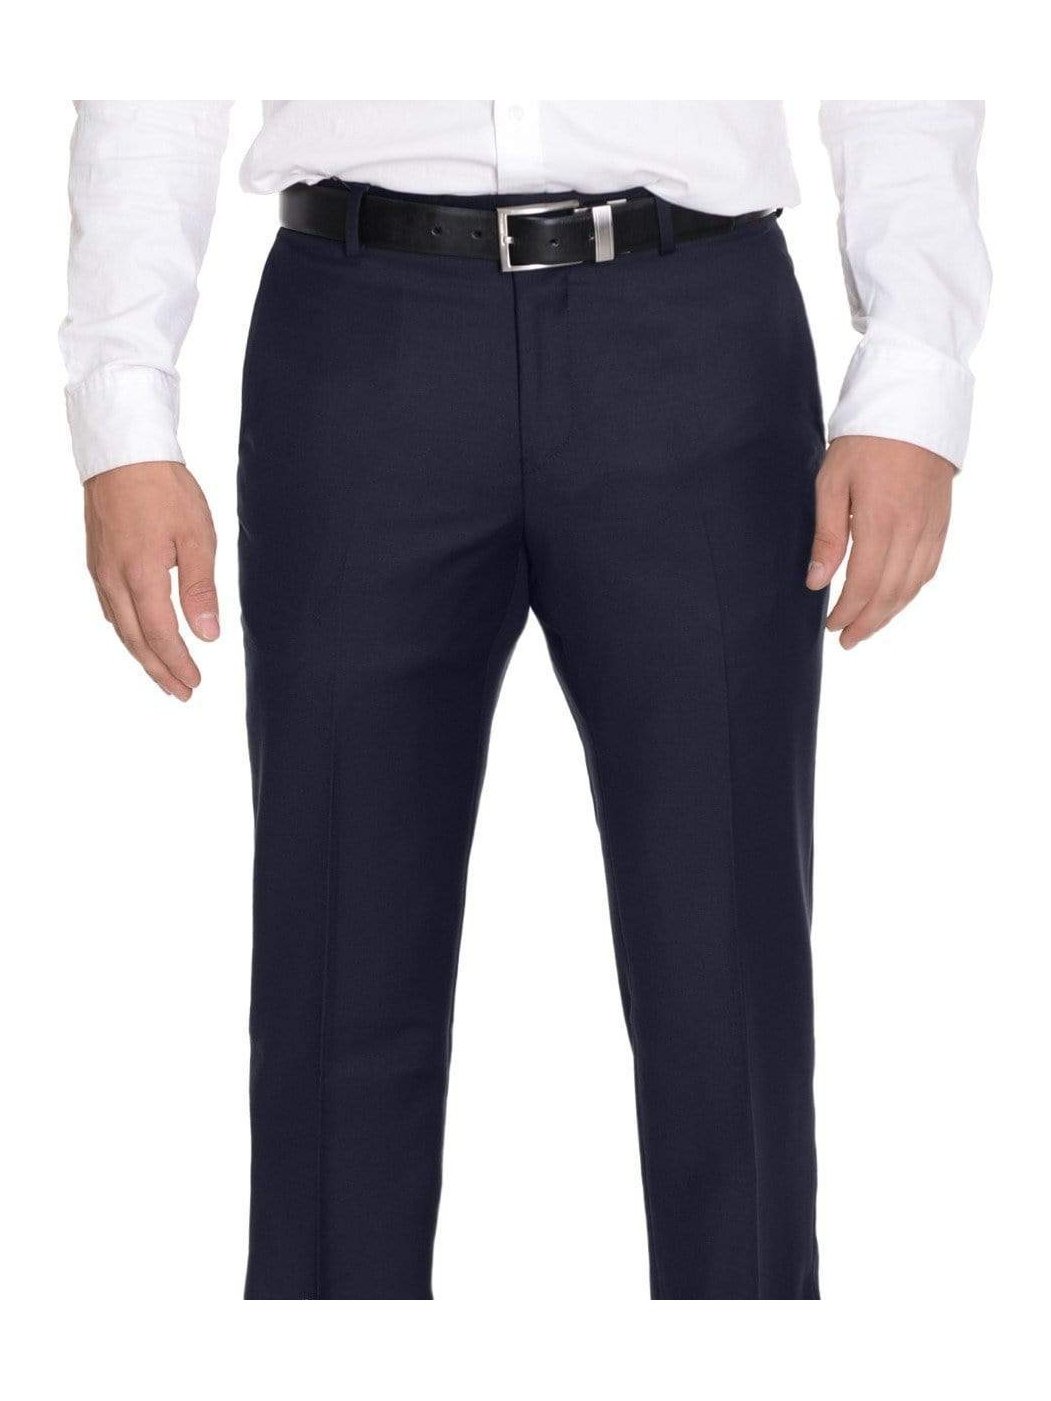 Buy Regular Trouser Pants Sky Blue Black and Navy Blue Combo of 3 Cotton  for Best Price, Reviews, Free Shipping